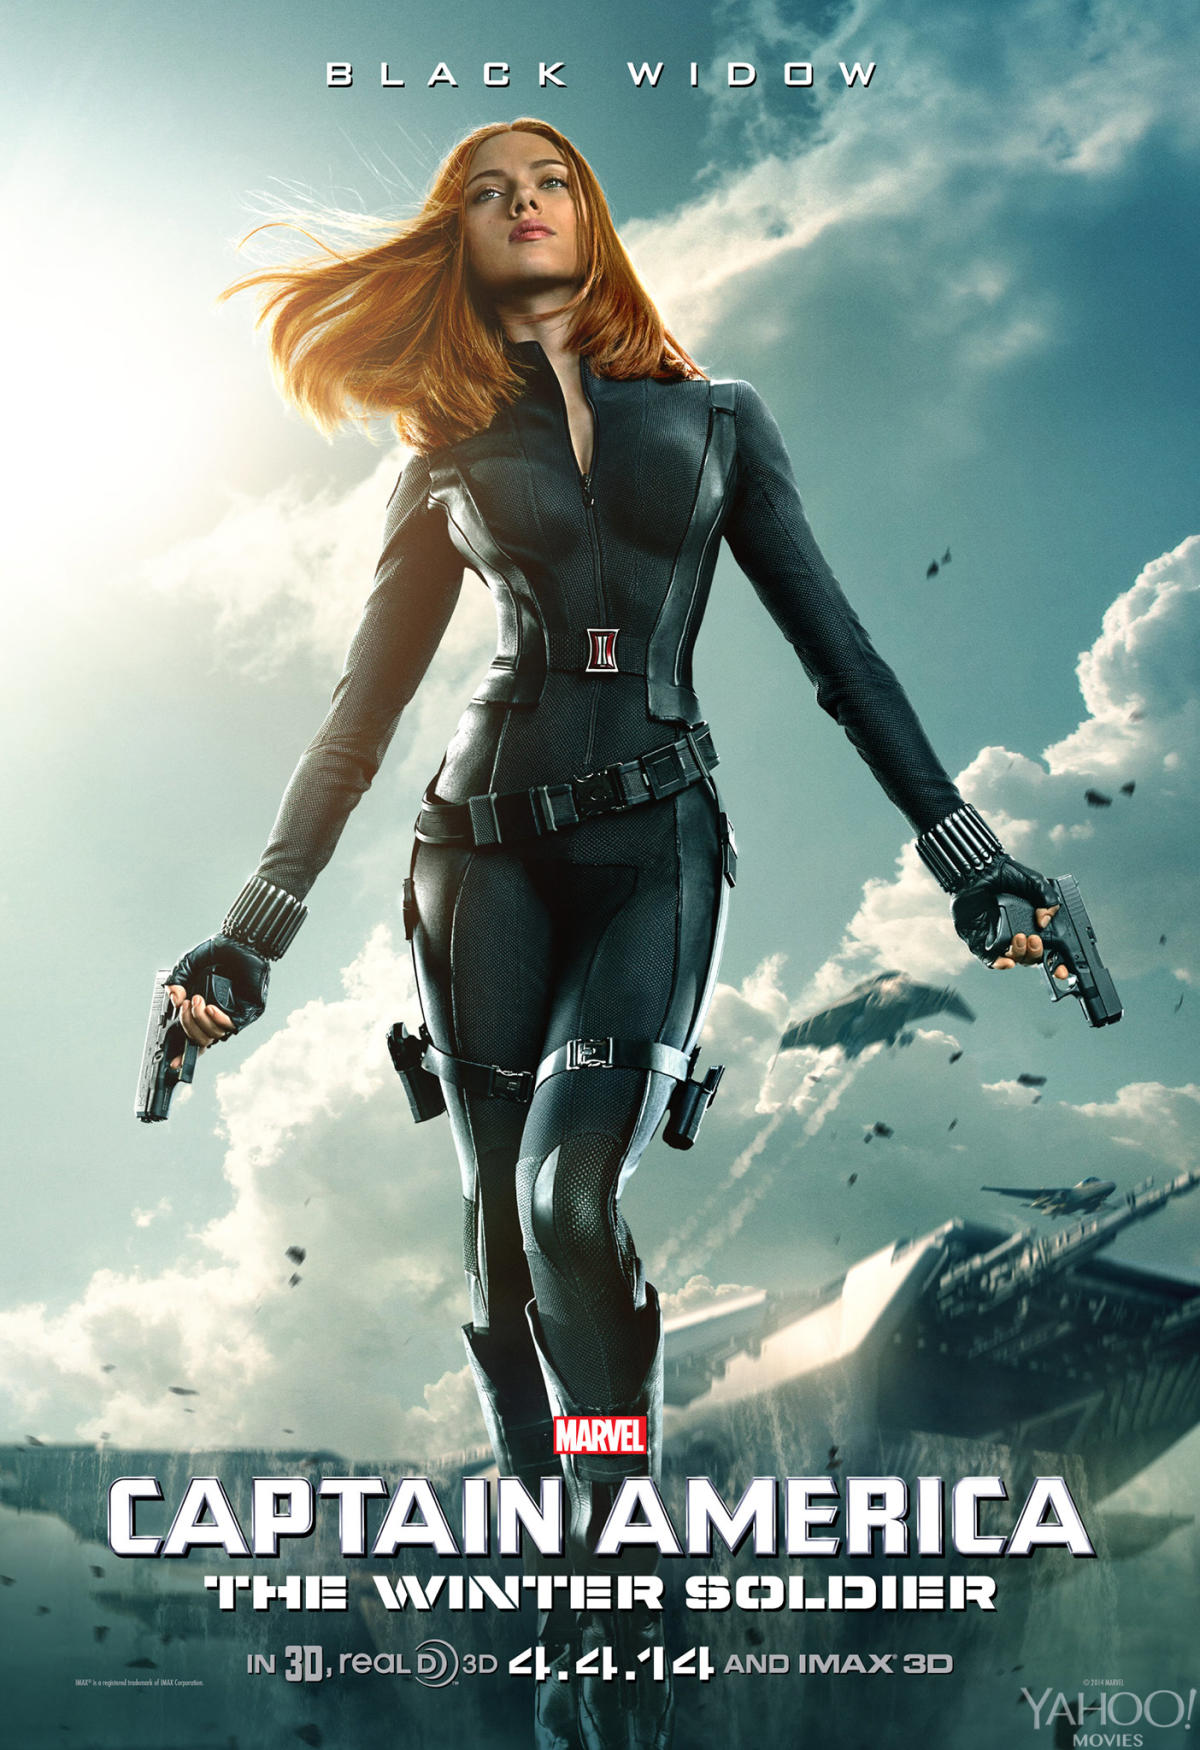 When Does the 'Black Widow' Movie Take Place?